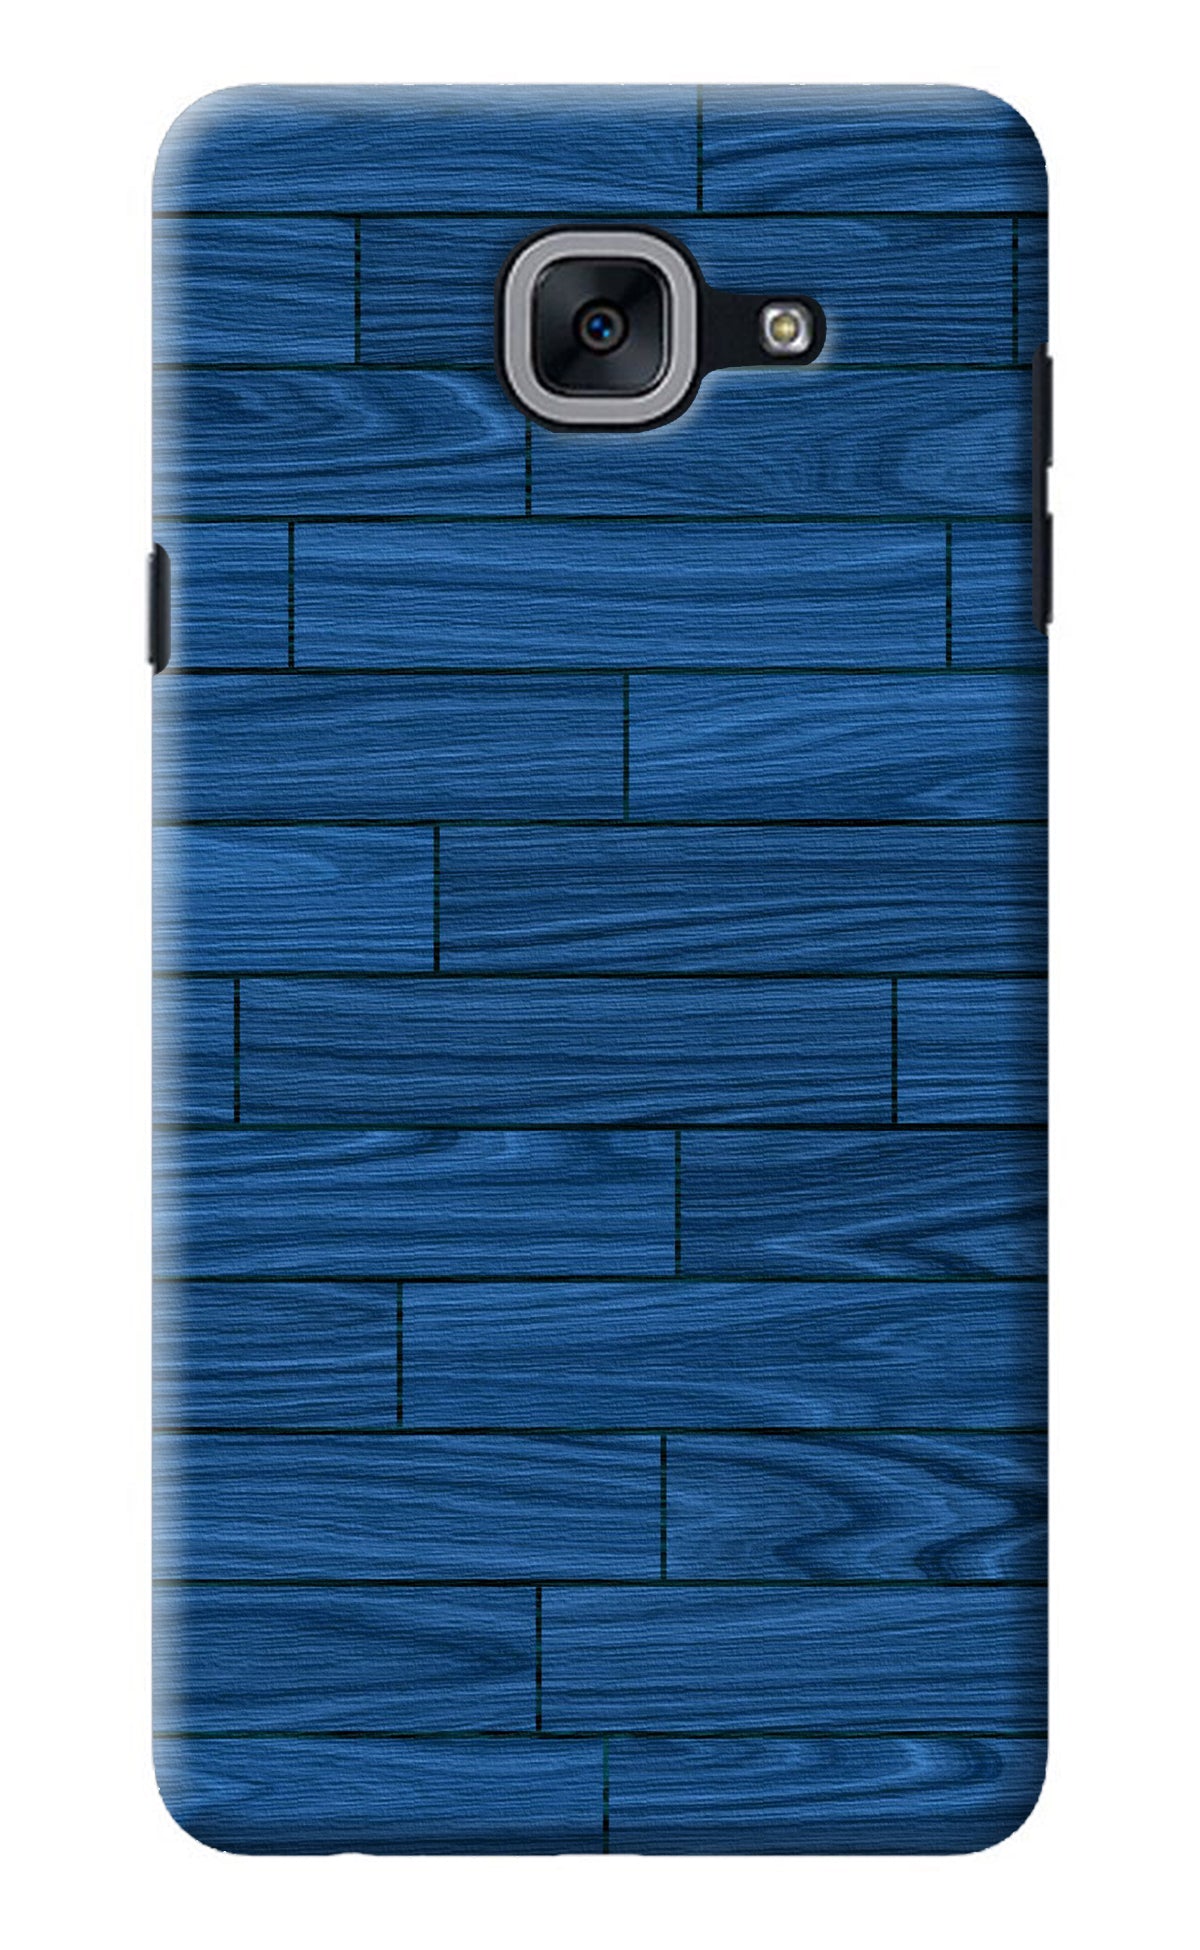 Wooden Texture Samsung J7 Max Back Cover